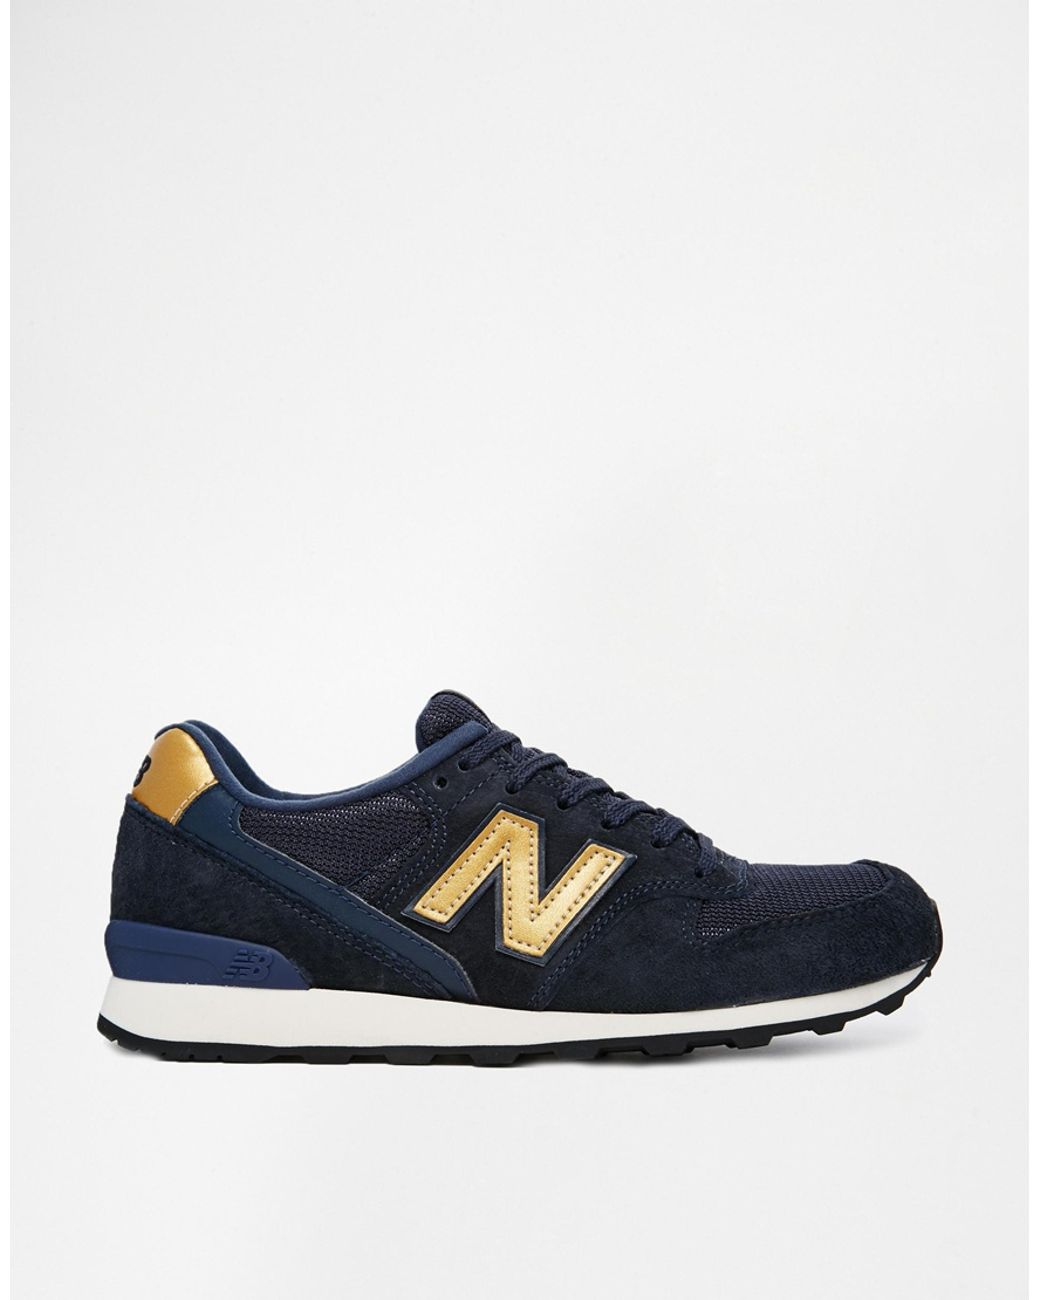 Perfect Delicious Billy New Balance 996 Suedemesh Blue and Gold Sneakers | Lyst